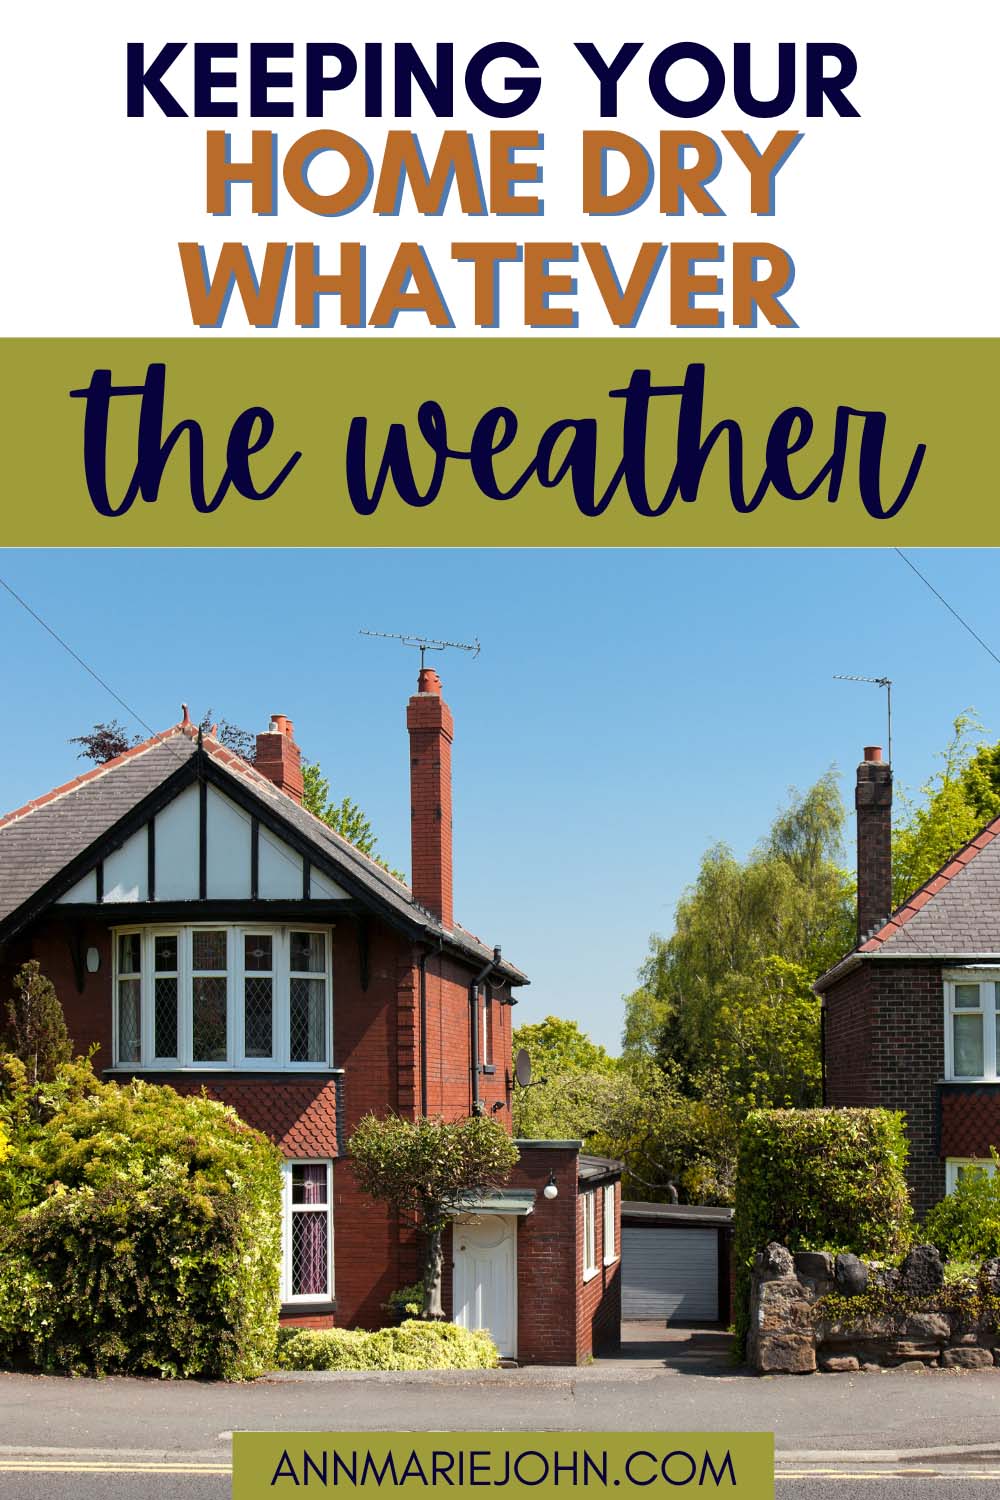 Keeping Your Home Dry Whatever the Weather